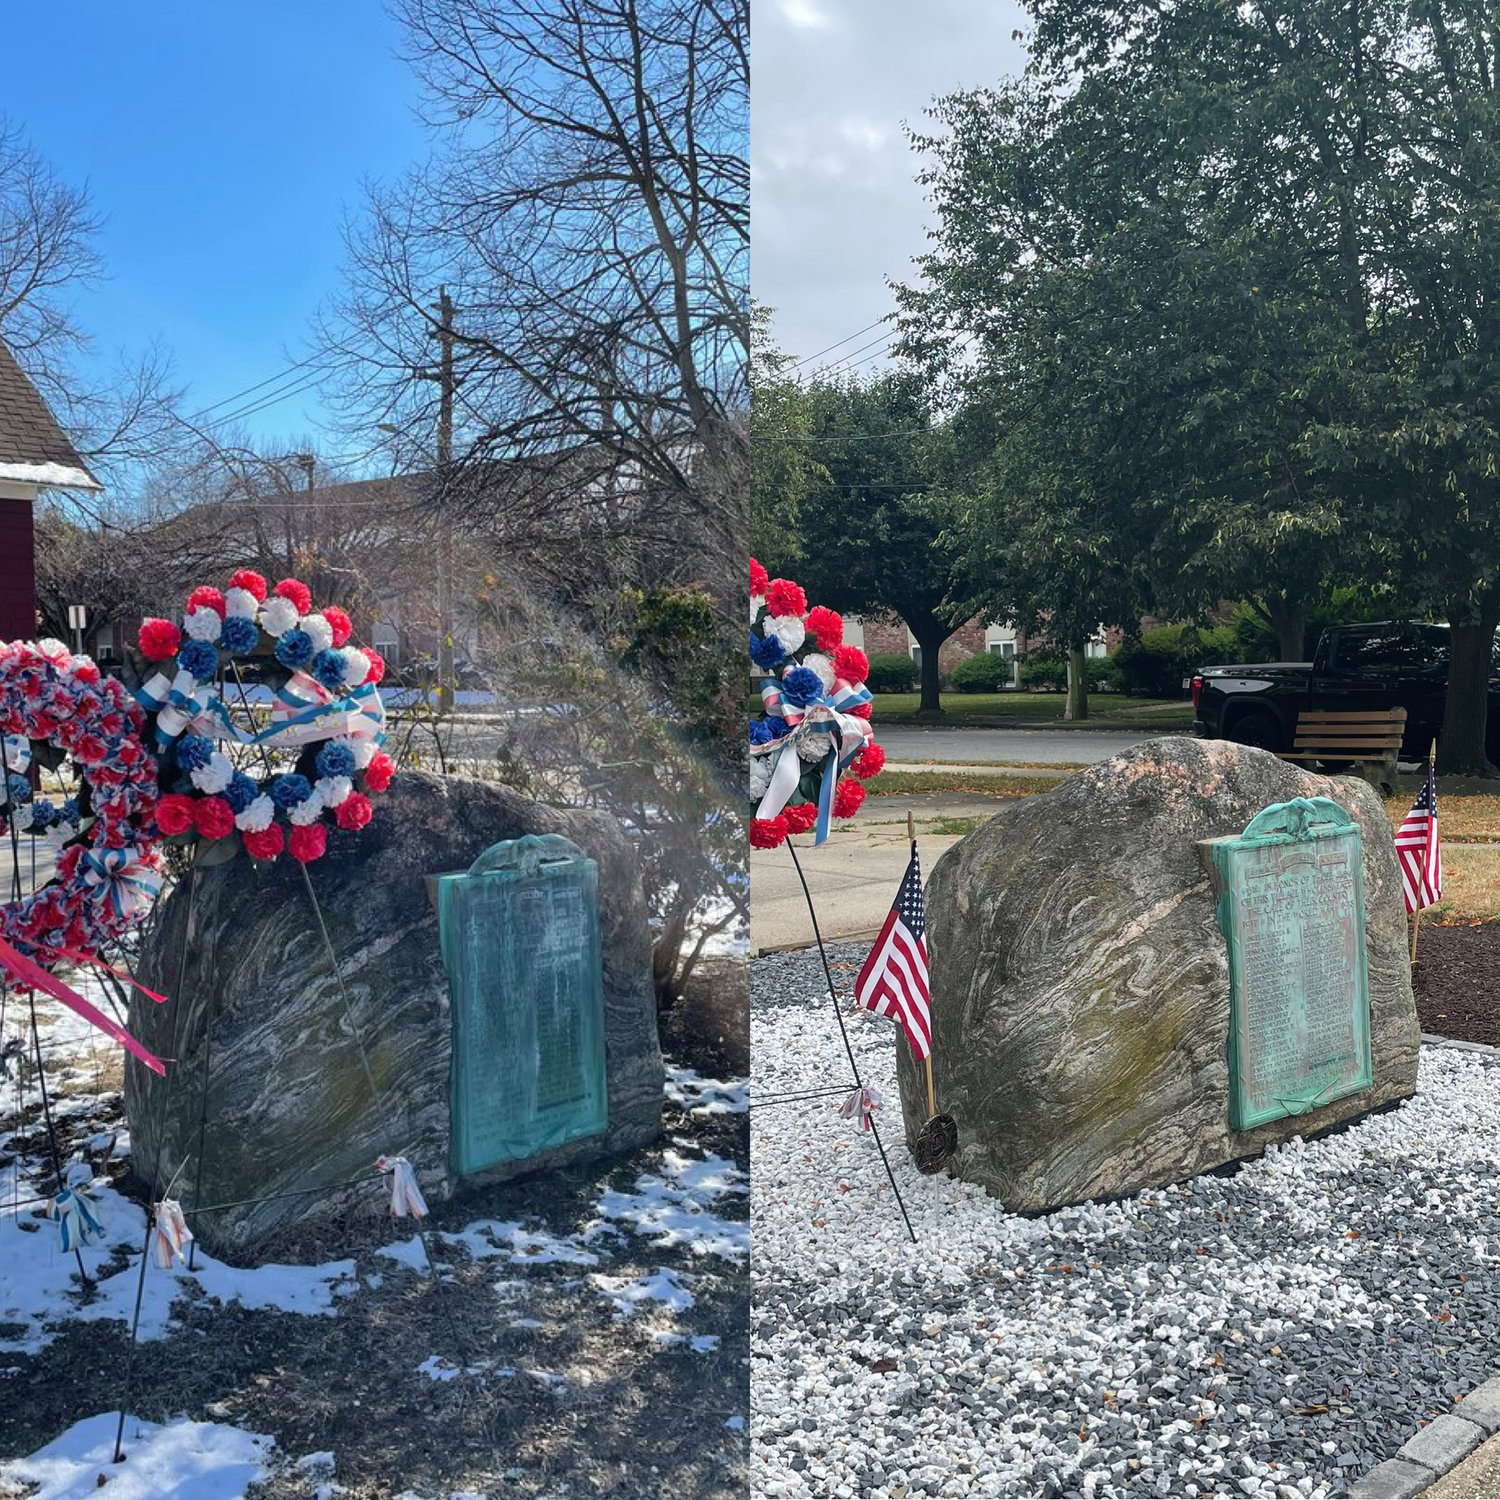 A World War 1 Memorial in front of the Old Merrick Library was recently restored. Brandon Goldstein, 16, a Boy Scout who is working on his Eagle rank, worked with Jewish War Veterans Post 652 to revive the marker. Above, the memorial in February, left, and after the restoration, right.